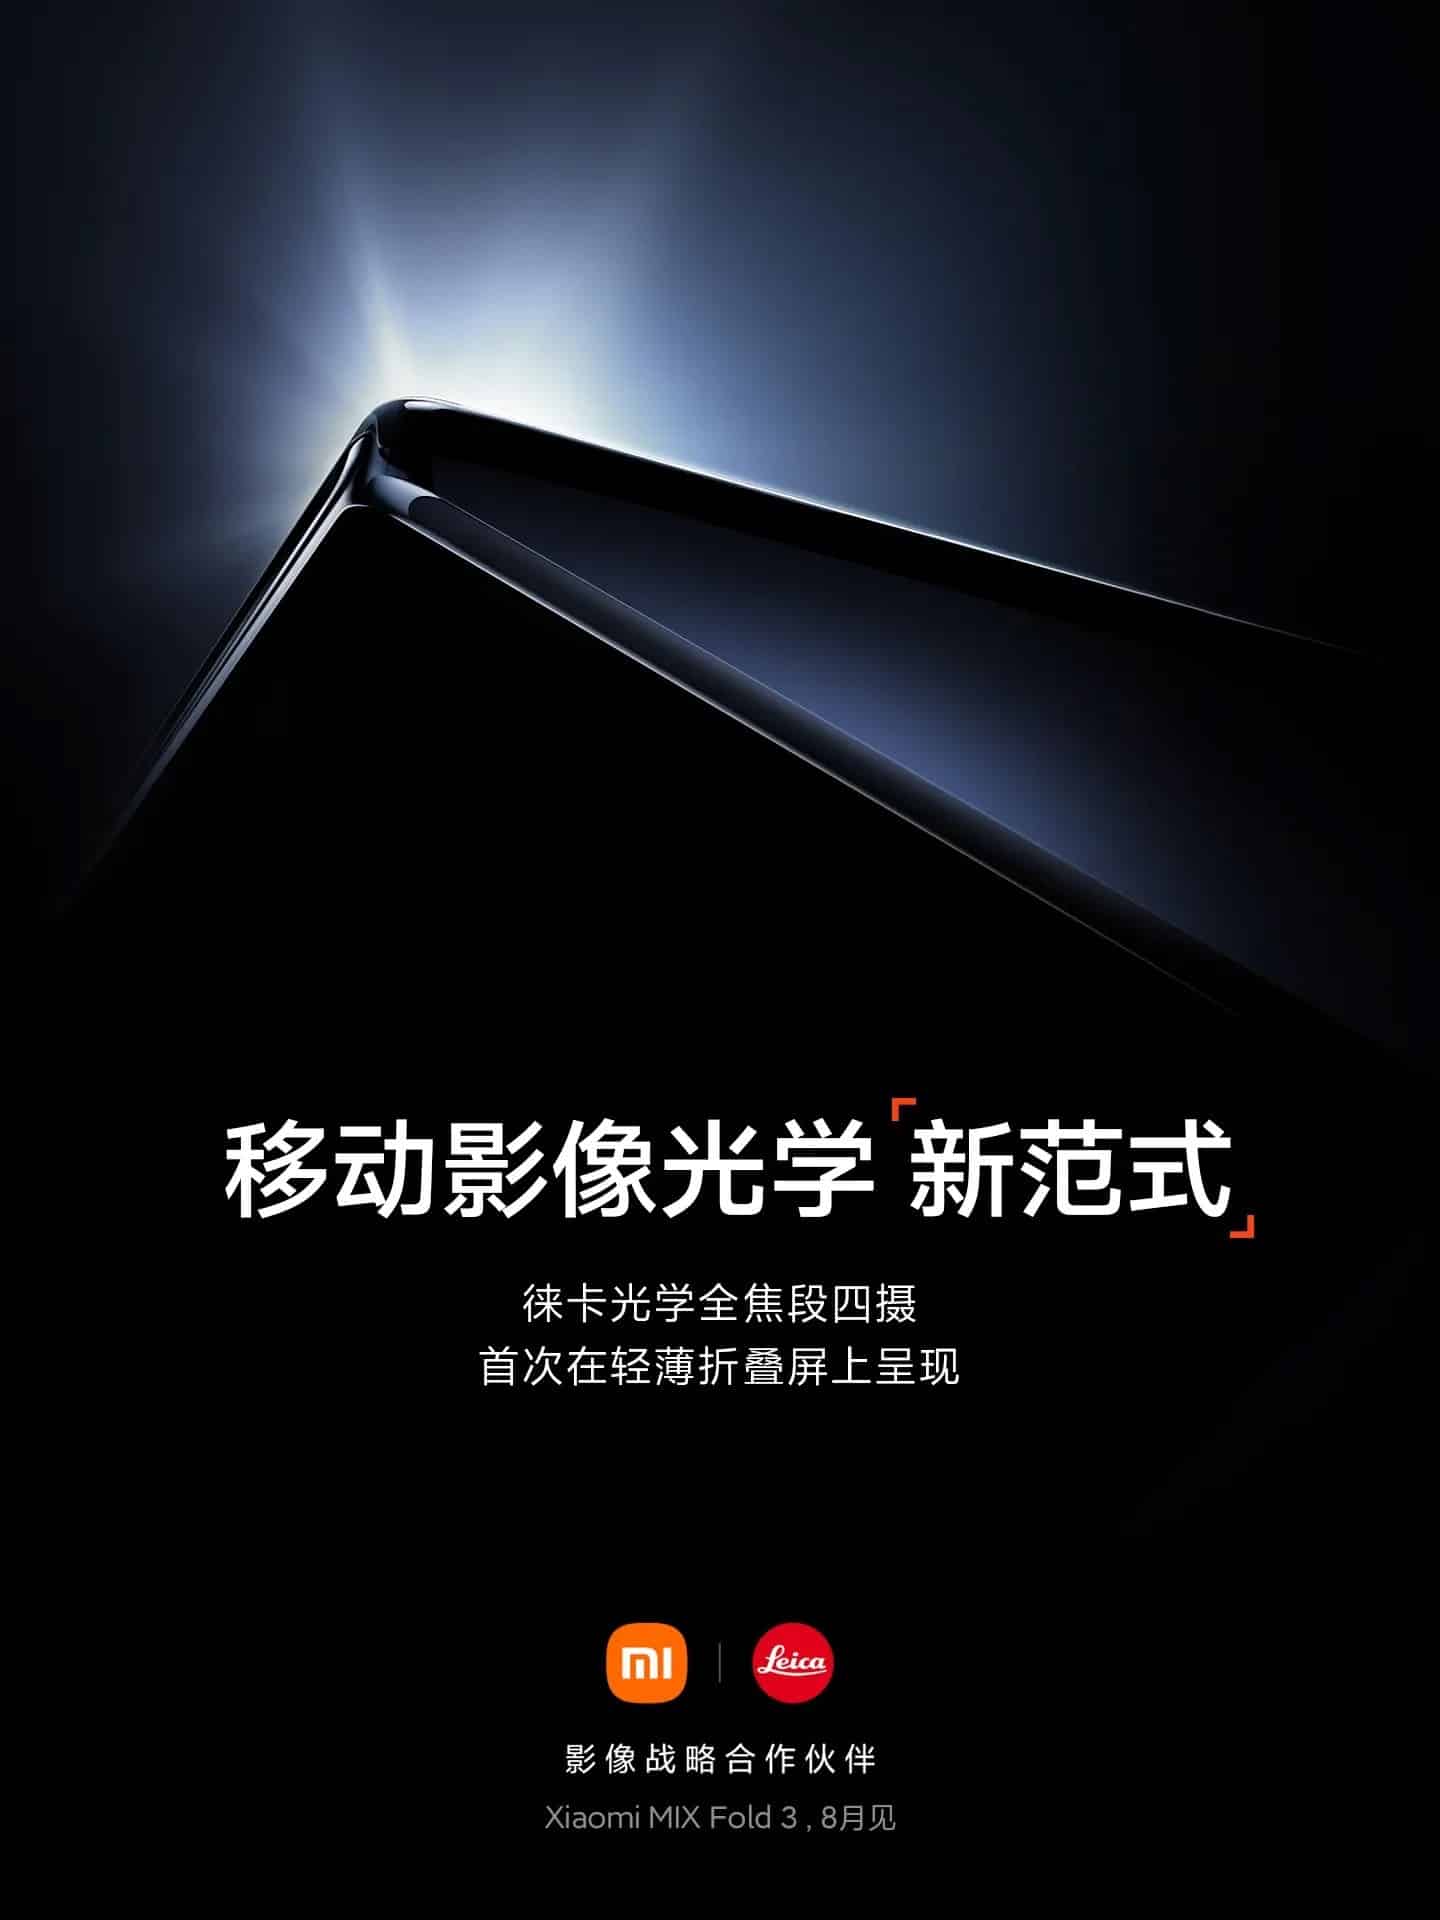 Xiaomi MIX Fold 3 Specifications (Rumored)